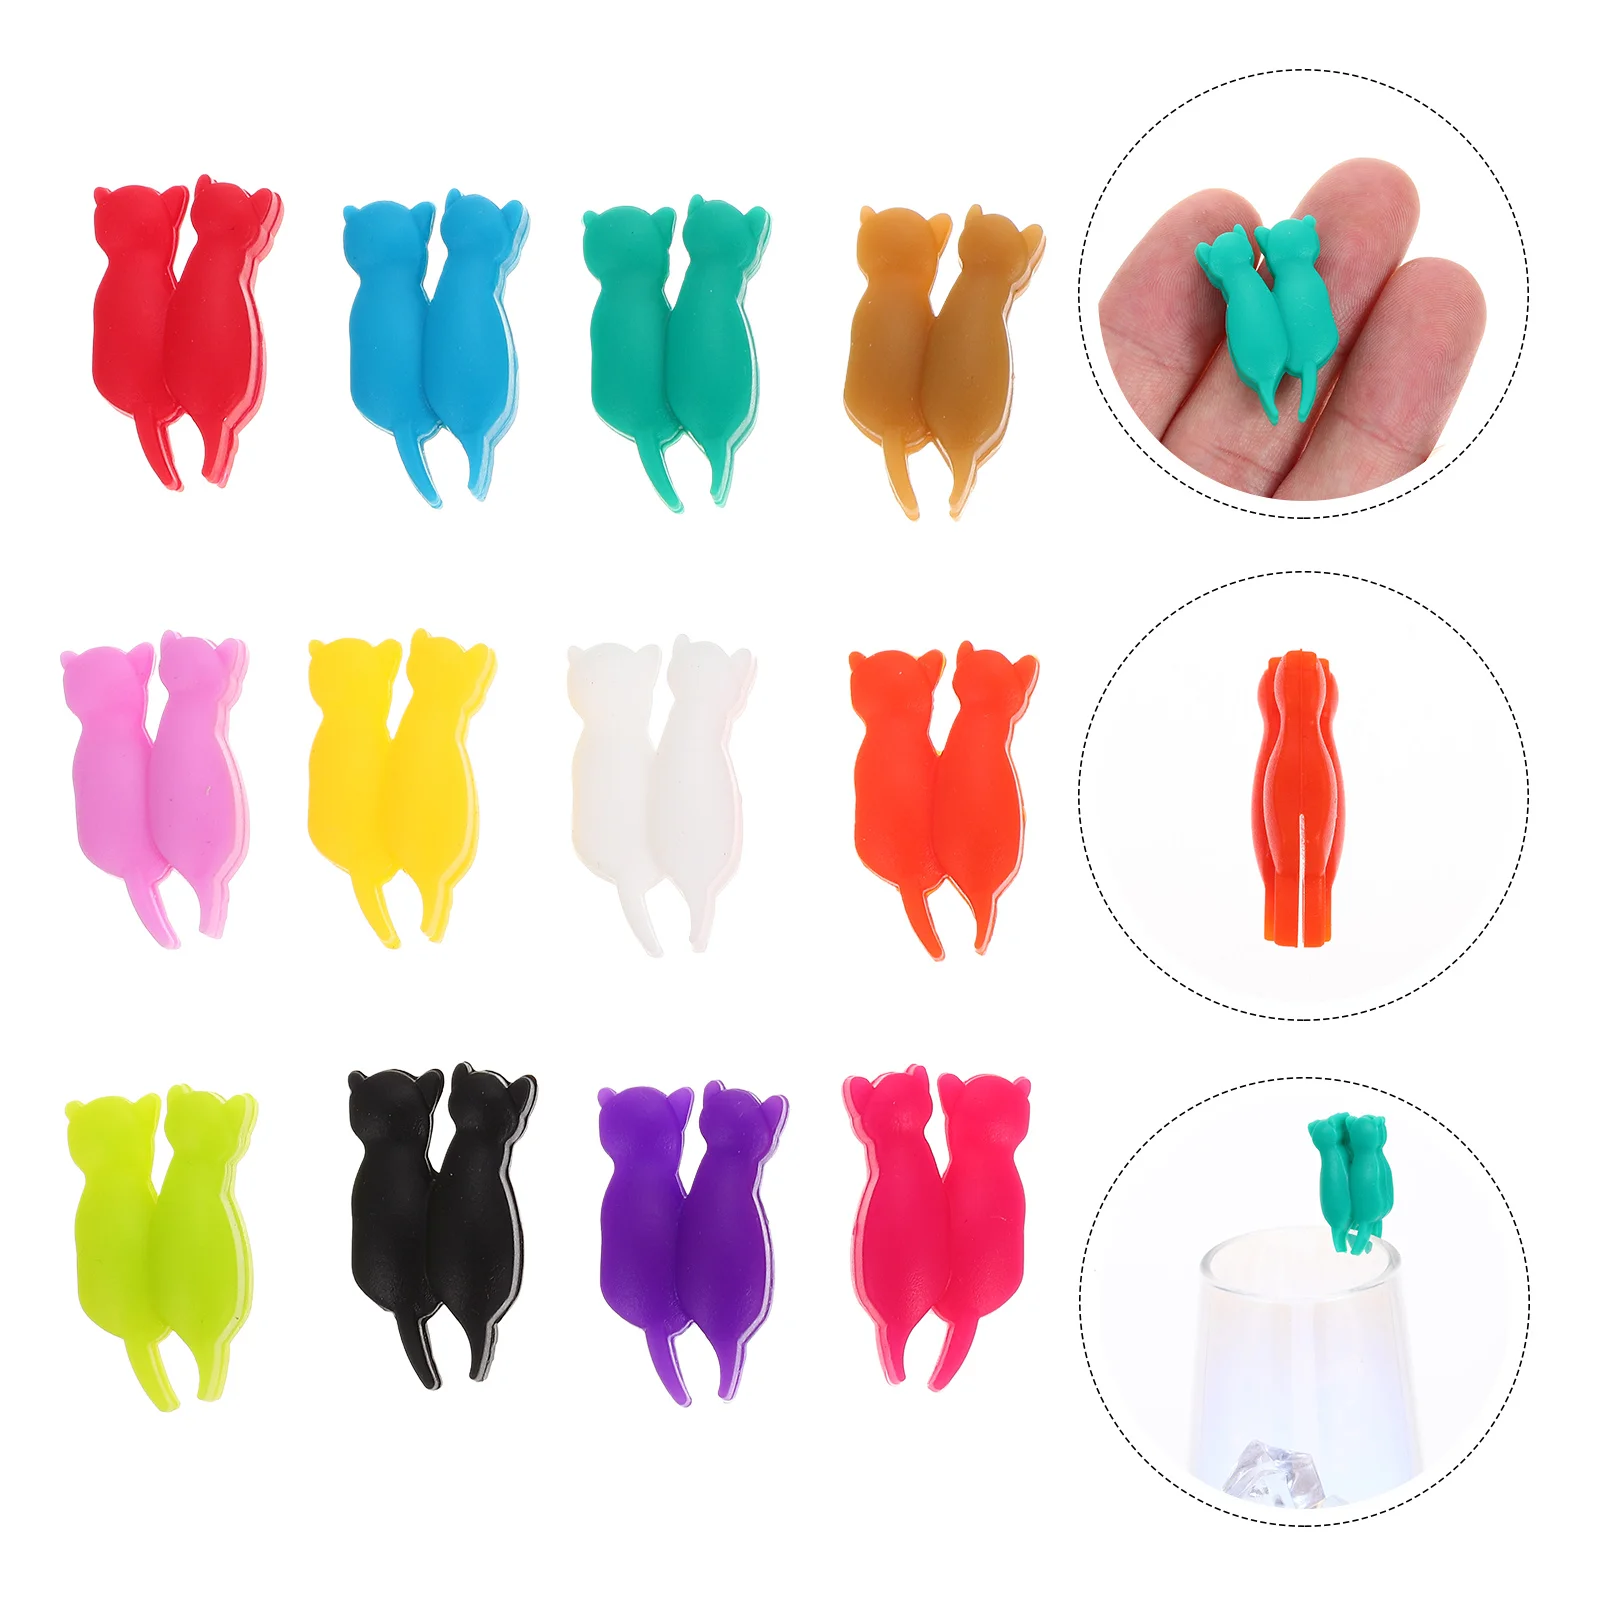 

12 Pcs Drink Tags Glass Marker Party Decor Silicone Cup 2.8X1.6X0.9CM Charm Silica Gel Clip Charms Decorative Ornament